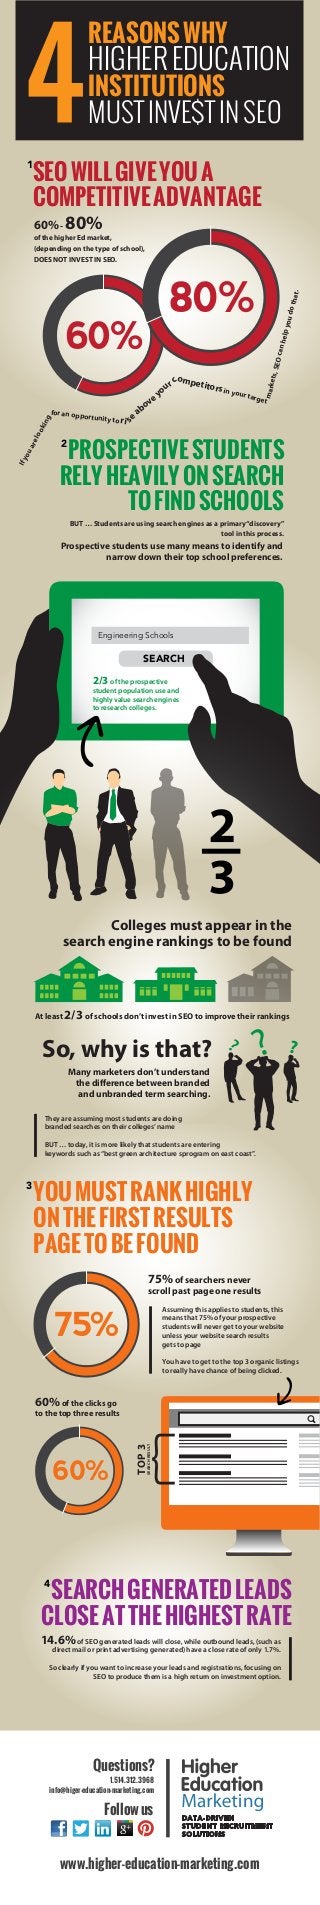 REASONS WHY

HIGHER EDUCATION

INSTITUTIONS

MUST INVE$T IN SEO

SEO WILL GIVE YOU A
COMPETITIVE ADVANTAGE

1

60% - 80%

of the higher Ed market,
(depending on the type of school),
DOES NOT INVEST IN SEO.

for an opp

lo o

k in

g

you d
mark
ets, S
E

O can

h el p

60%

o th a
t.

80%

ortunity t
o

ri s

o
r c mpetitor
u
s in yo
ur tar
yo
get
e
v
o
ab
e

PROSPECTIVE STUDENTS
RELY HEAVILY ON SEARCH
TO FIND SCHOOLS

If y
ou

are

2

BUT … Students are using search engines as a primary “discovery”
tool in this process.

Prospective students use many means to identify and
narrow down their top school preferences.

Engineering Schools

SEARCH

2/3 of the prospective

student population use and
highly value search engines
to research colleges.

Colleges must appear in the
search engine rankings to be found

At least 2/3 of schools don’t invest in SEO to improve their rankings

So, why is that?

?

Many marketers don’t understand
the difference between branded
and unbranded term searching.

?

?

They are assuming most students are doing
branded searches on their colleges’ name
BUT … today, it is more likely that students are entering
keywords such as “best green architecture sprogram on east coast”.

YOU MUST RANK HIGHLY
ON THE FIRST RESULTS
PAGE TO BE FOUND
75% of searchers never

scroll past page one results
Assuming this applies to students, this
means that 75% of your prospective
students will never get to your website
unless your website search results
gets to page

75%

You have to get to the top 3 organic listings
to really have chance of being clicked.

60% of the clicks go

to the top three results

TOP 3

60%

SEARCH RESULT

3

SEARCH GENERATED LEADS
CLOSE AT THE HIGHEST RATE
4

14.6% of SEO generated leads will close, while outbound leads, (such as

direct mail or print advertising generated) have a close rate of only 1.7%.

So clearly if you want to increase your leads and registrations, focusing on
SEO to produce them is a high return on investment option.

Questions?

1.514.312.3968
info@higer-education-marketing.com

Follow us
www.higher-education-marketing.com

 